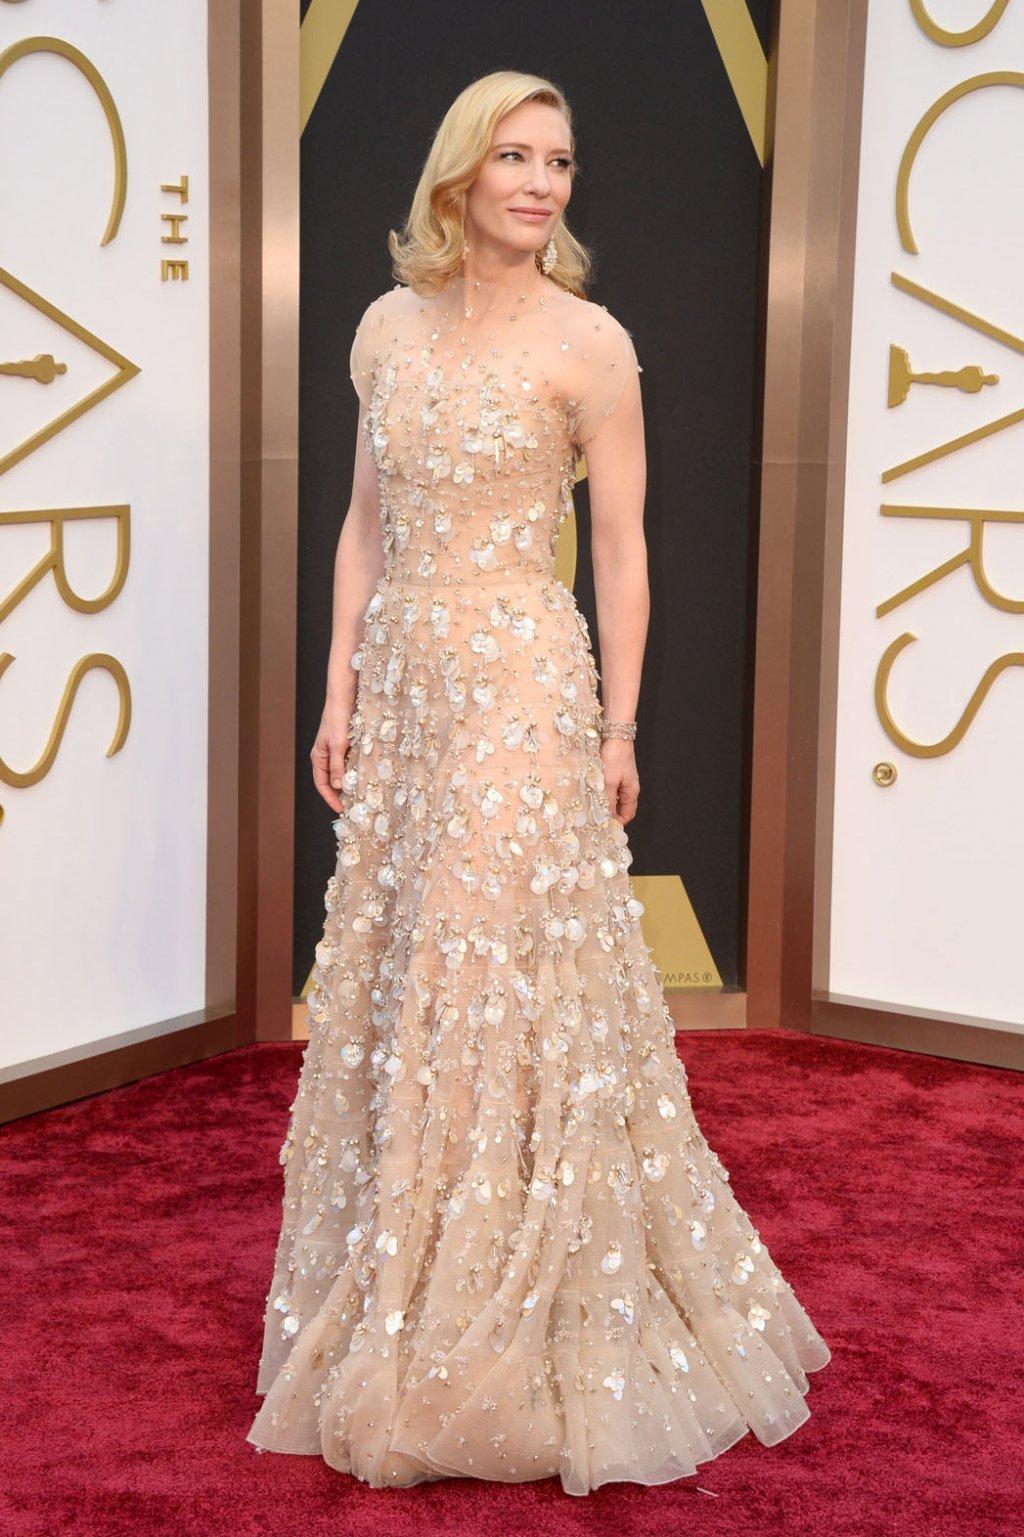 Cate Blanchett arrives at the Oscars on Sunday, March 2, 2014, at the Dolby Theatre in Los Angeles.  (Photo by Jordan Strauss/Invision/AP)